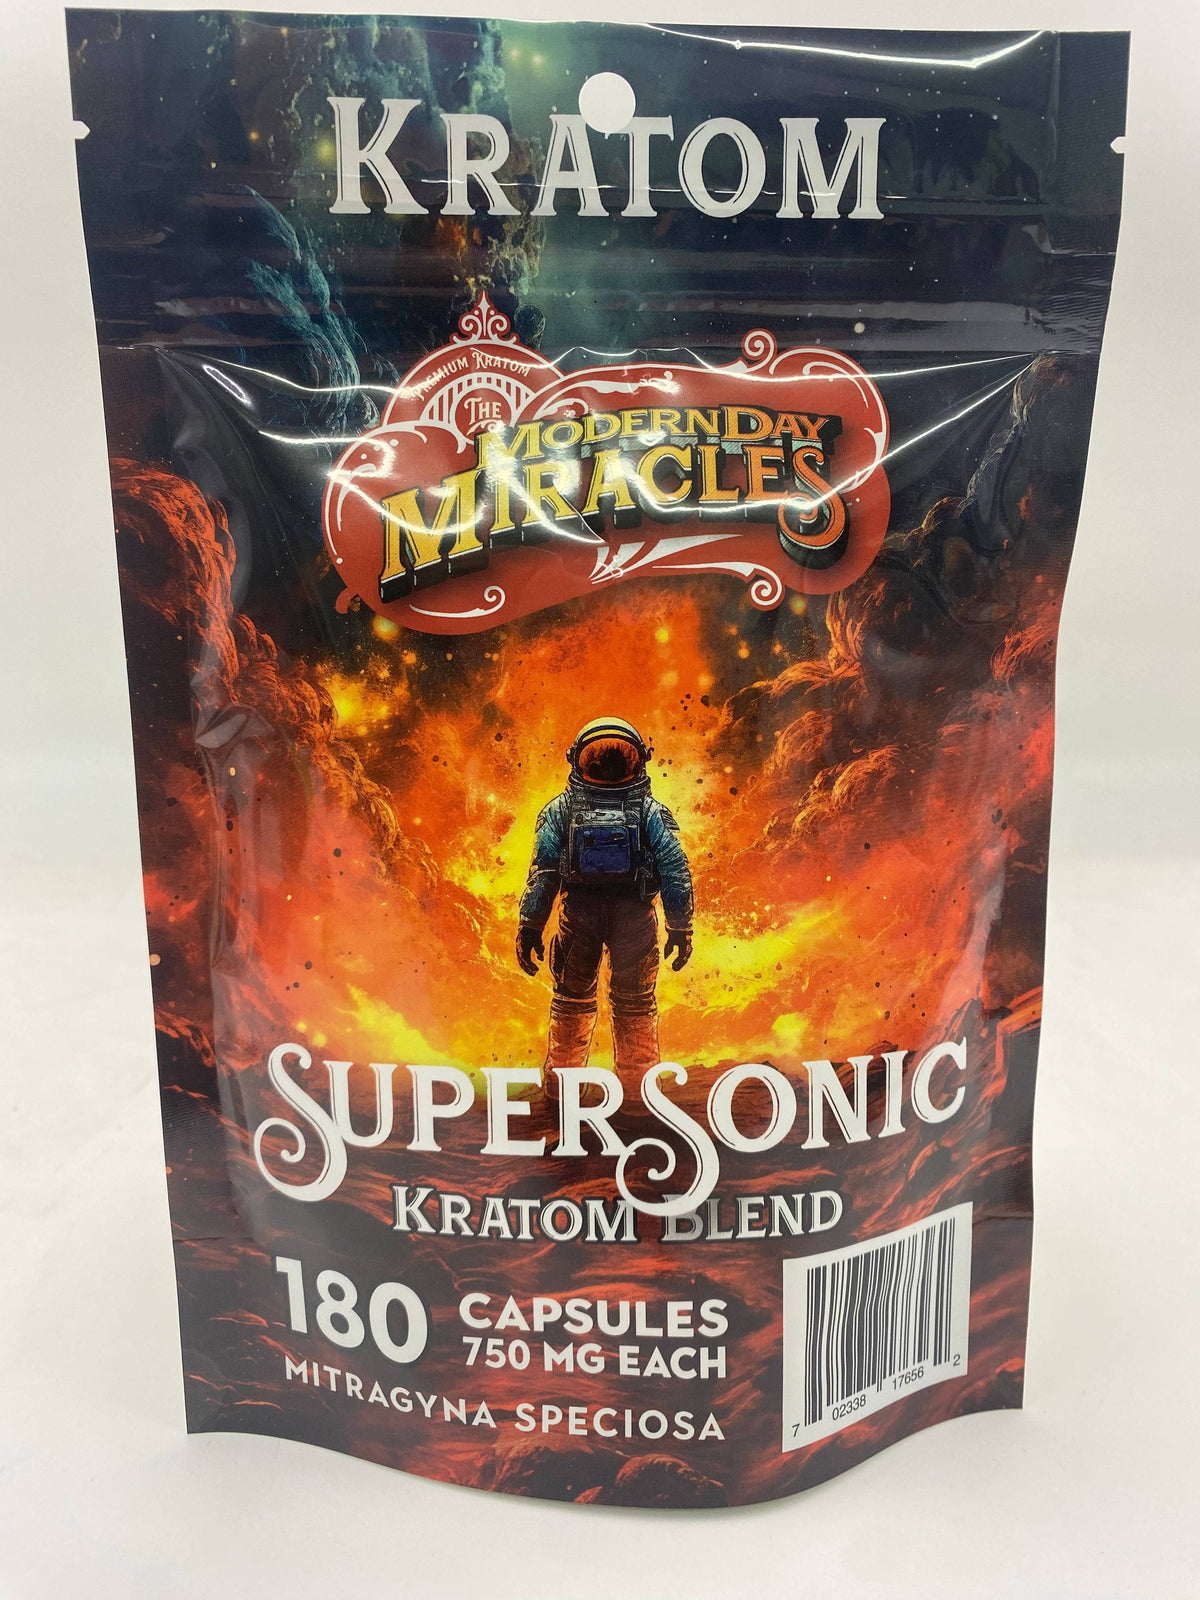 Modern Day Miracles Space Blends- Supersonic Red Kratom Borneo Blend 180ct Capsules